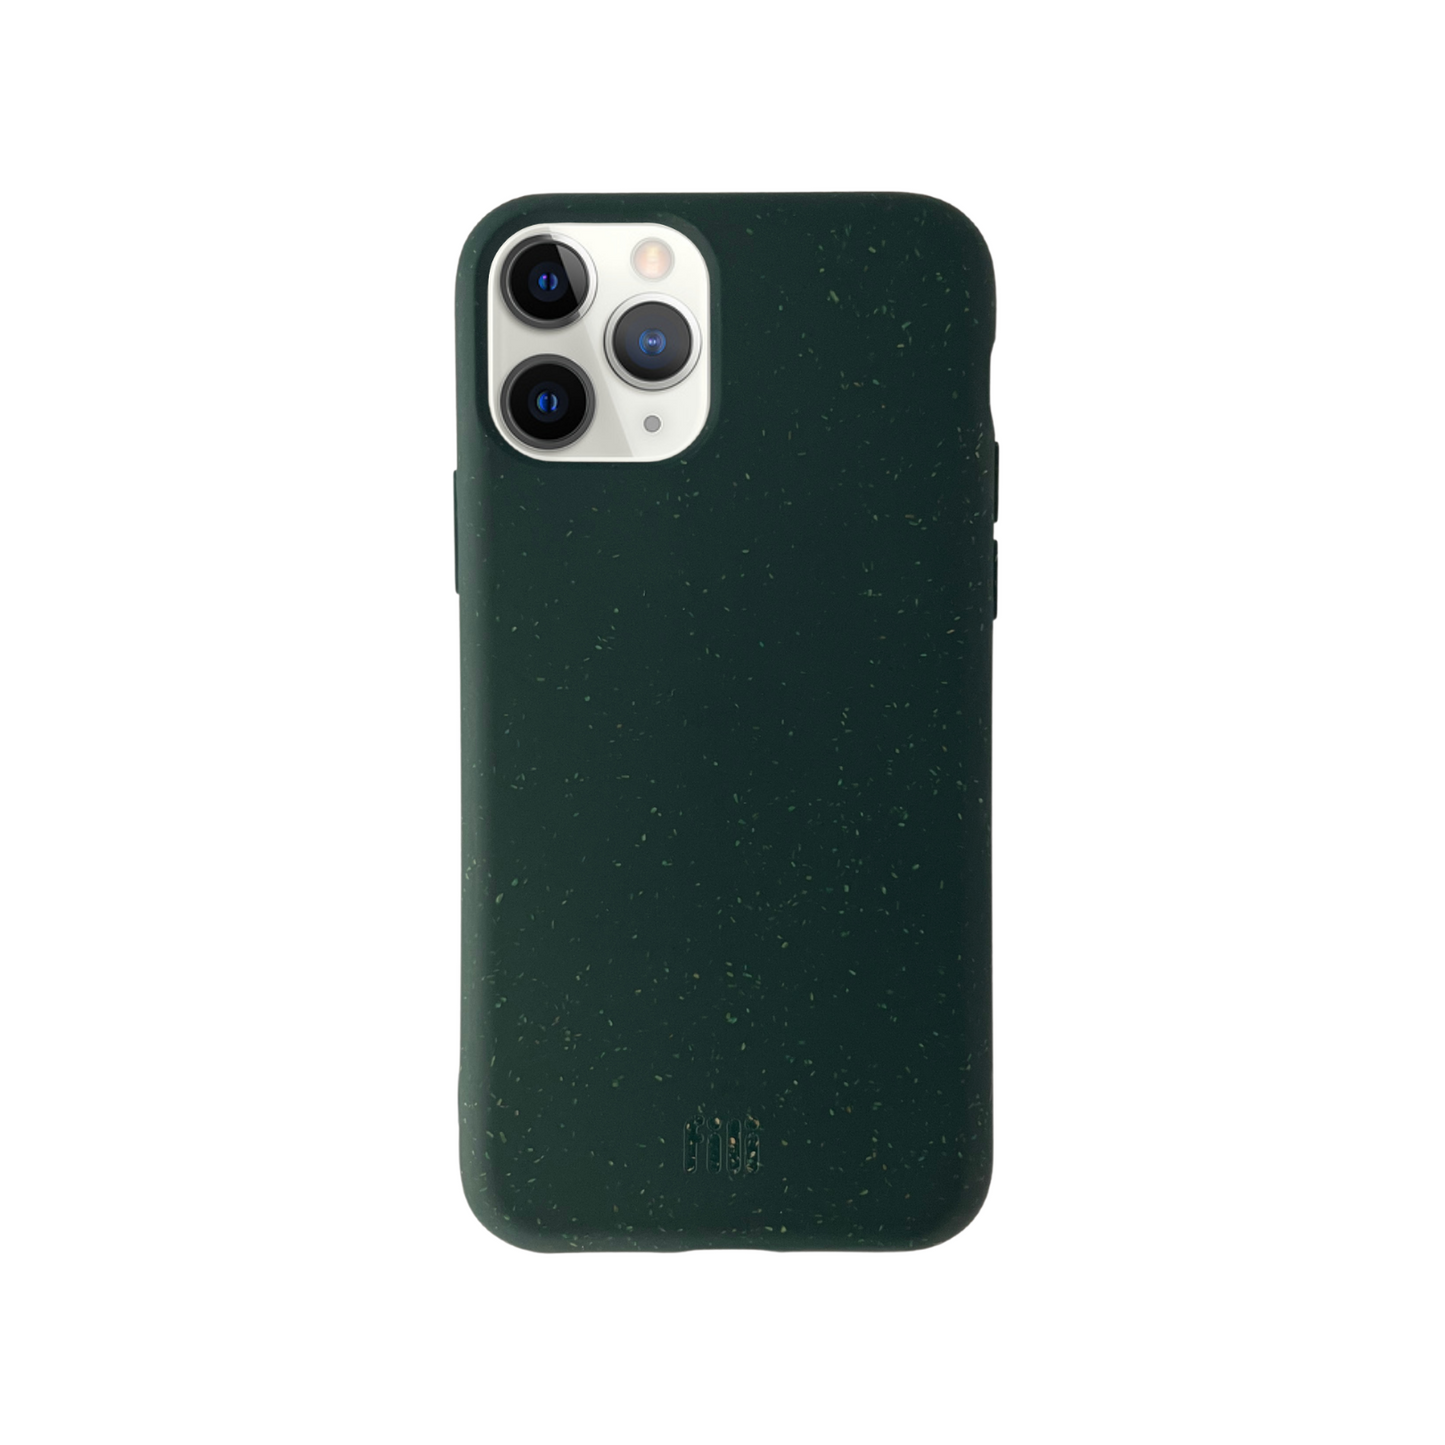 FILI Biodegradable Smooth iPhone 11 Pro Case